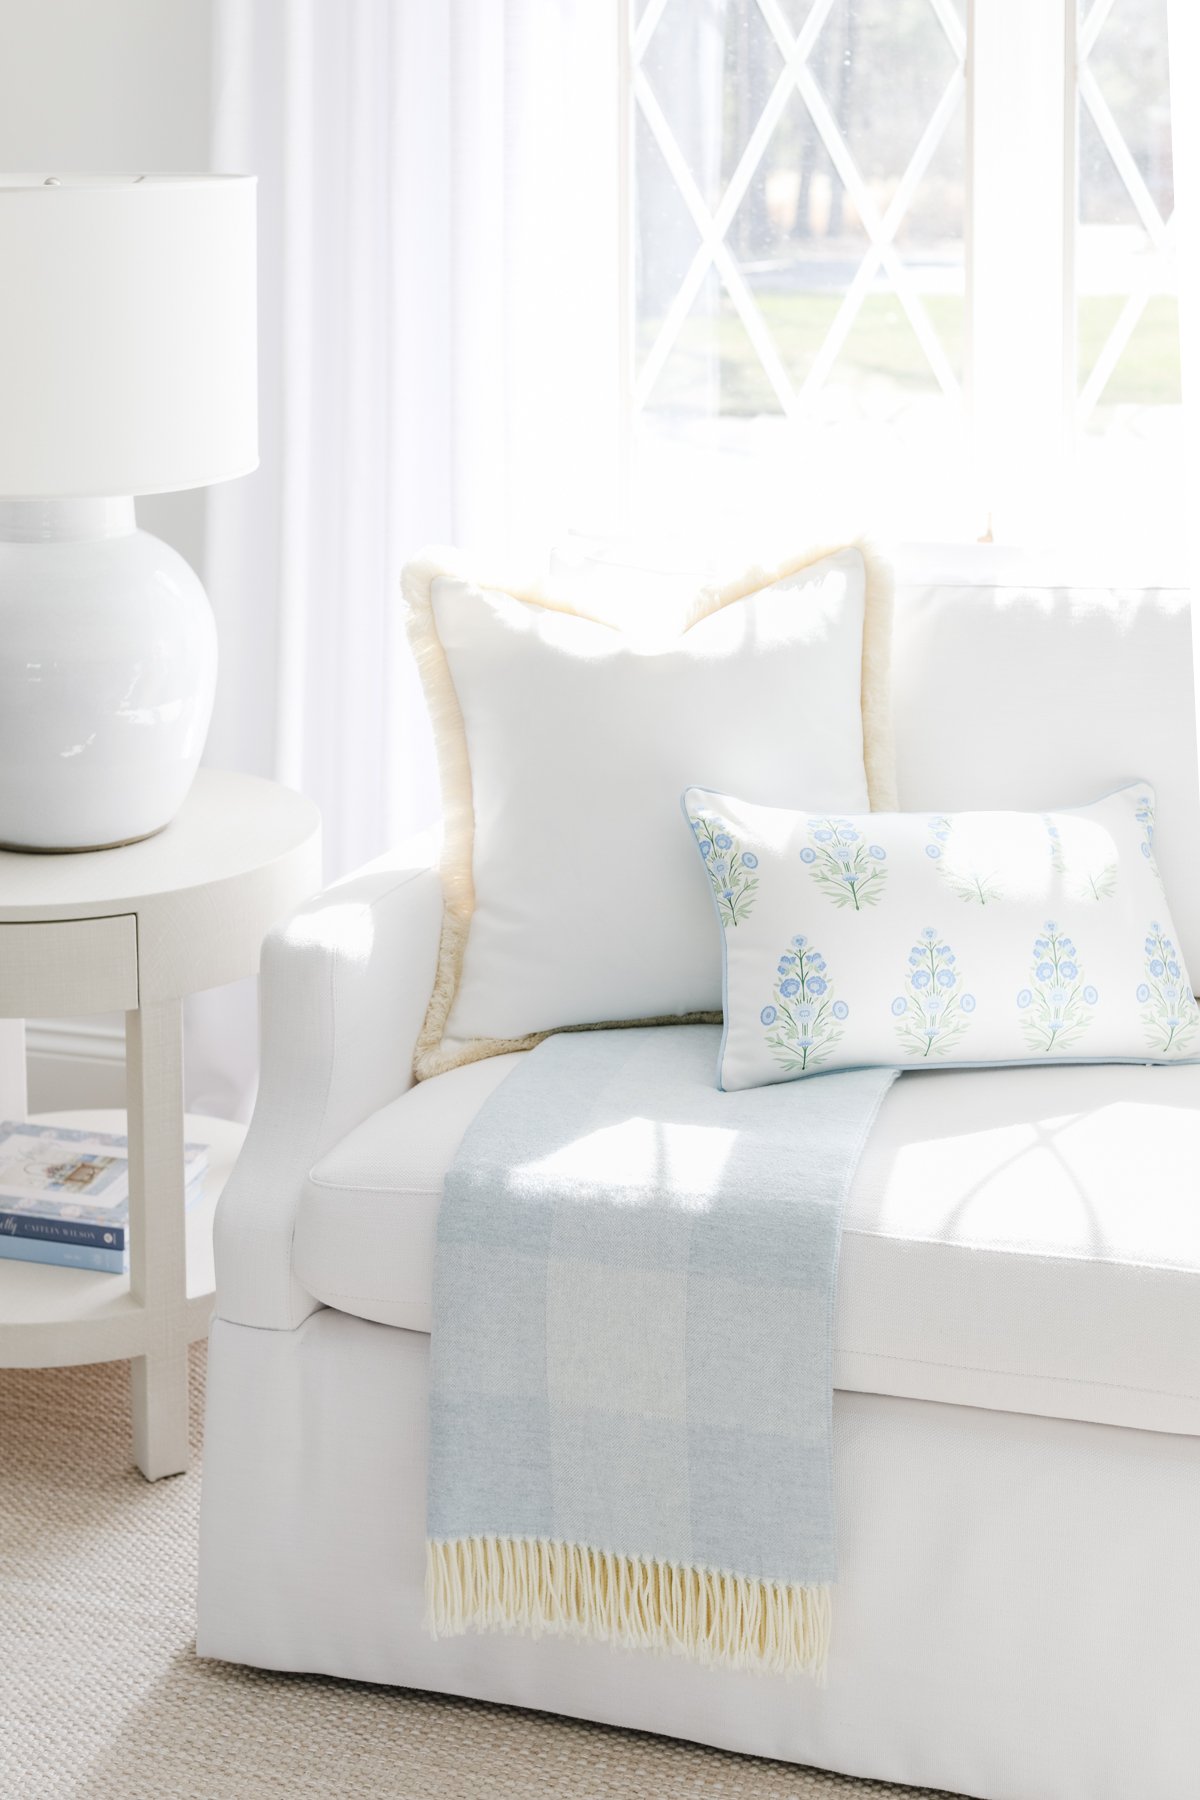 A white sofa with white and floral cushions is placed next to a small, round side table with a white lamp in a bright living room. A light blue throw blanket is draped over the sofa.